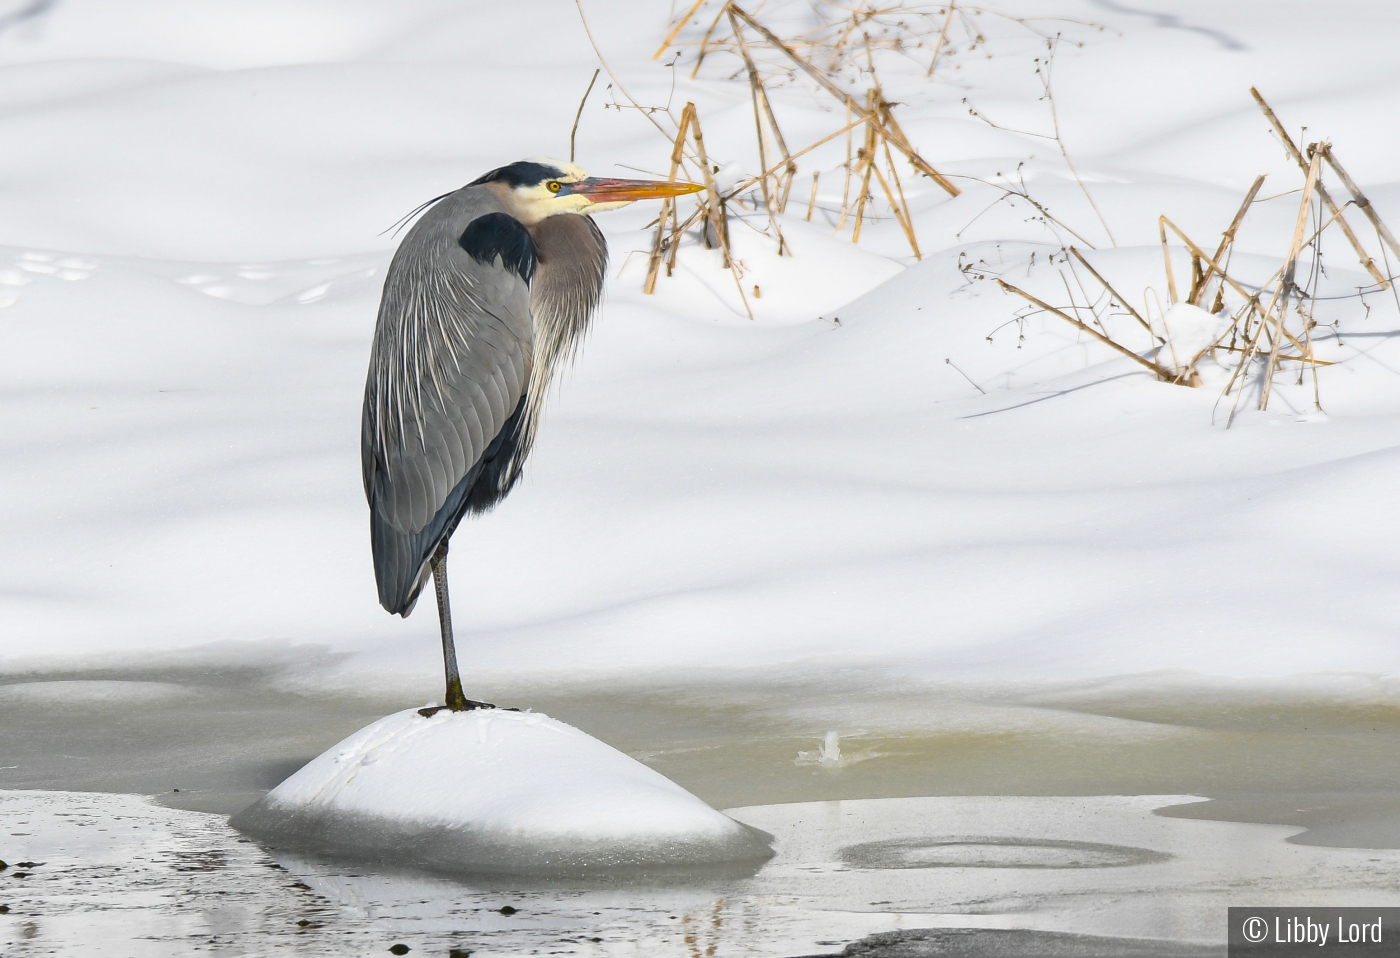 Heron in the Snow by Libby Lord